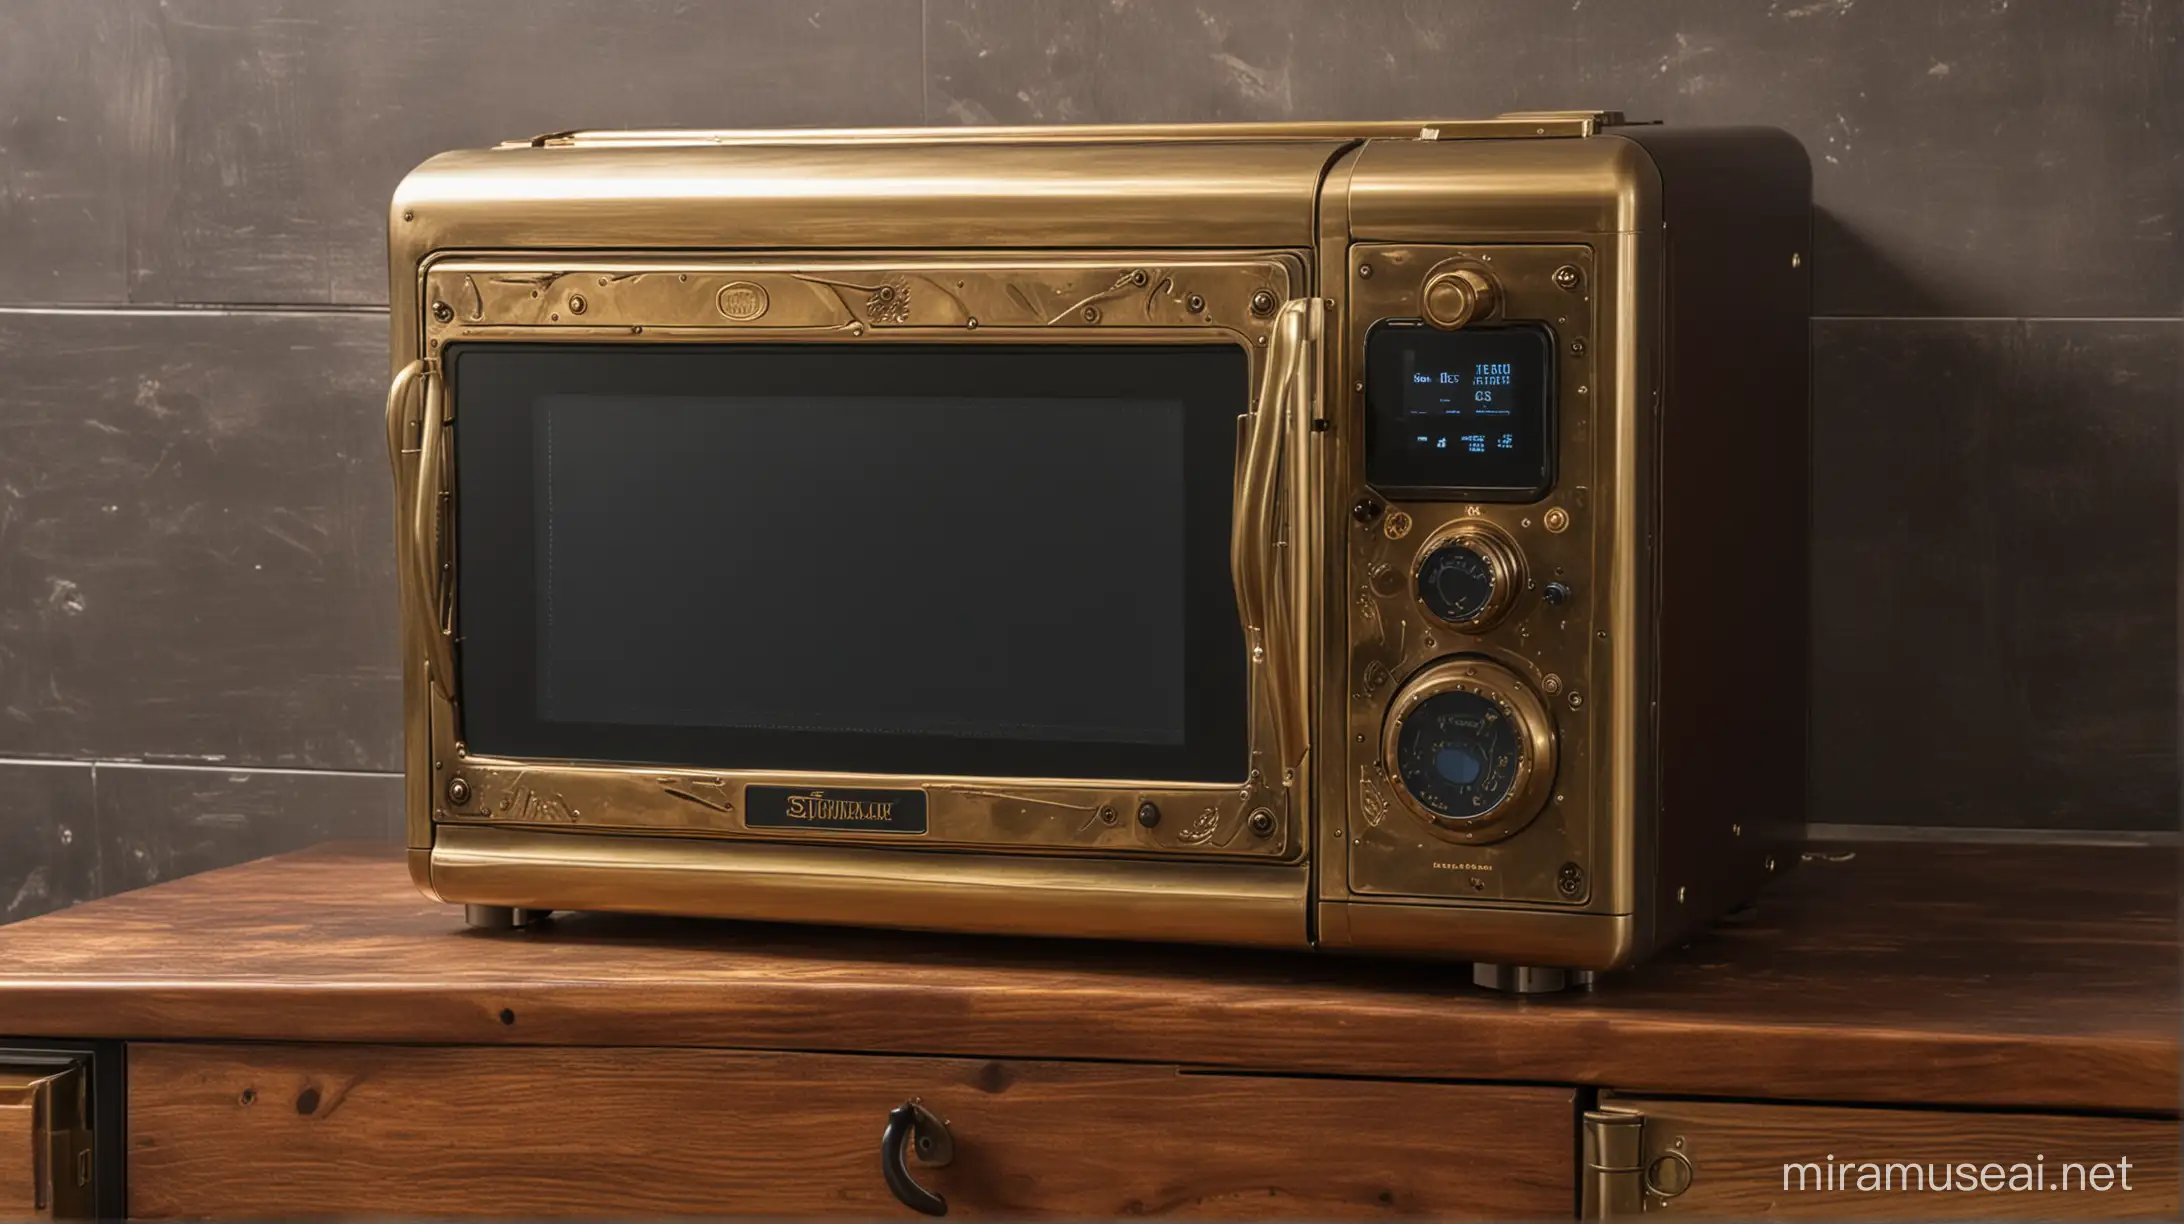 Steampunk Brass and Glass Microwave Oven on Cupboard in Vintage Kitchen